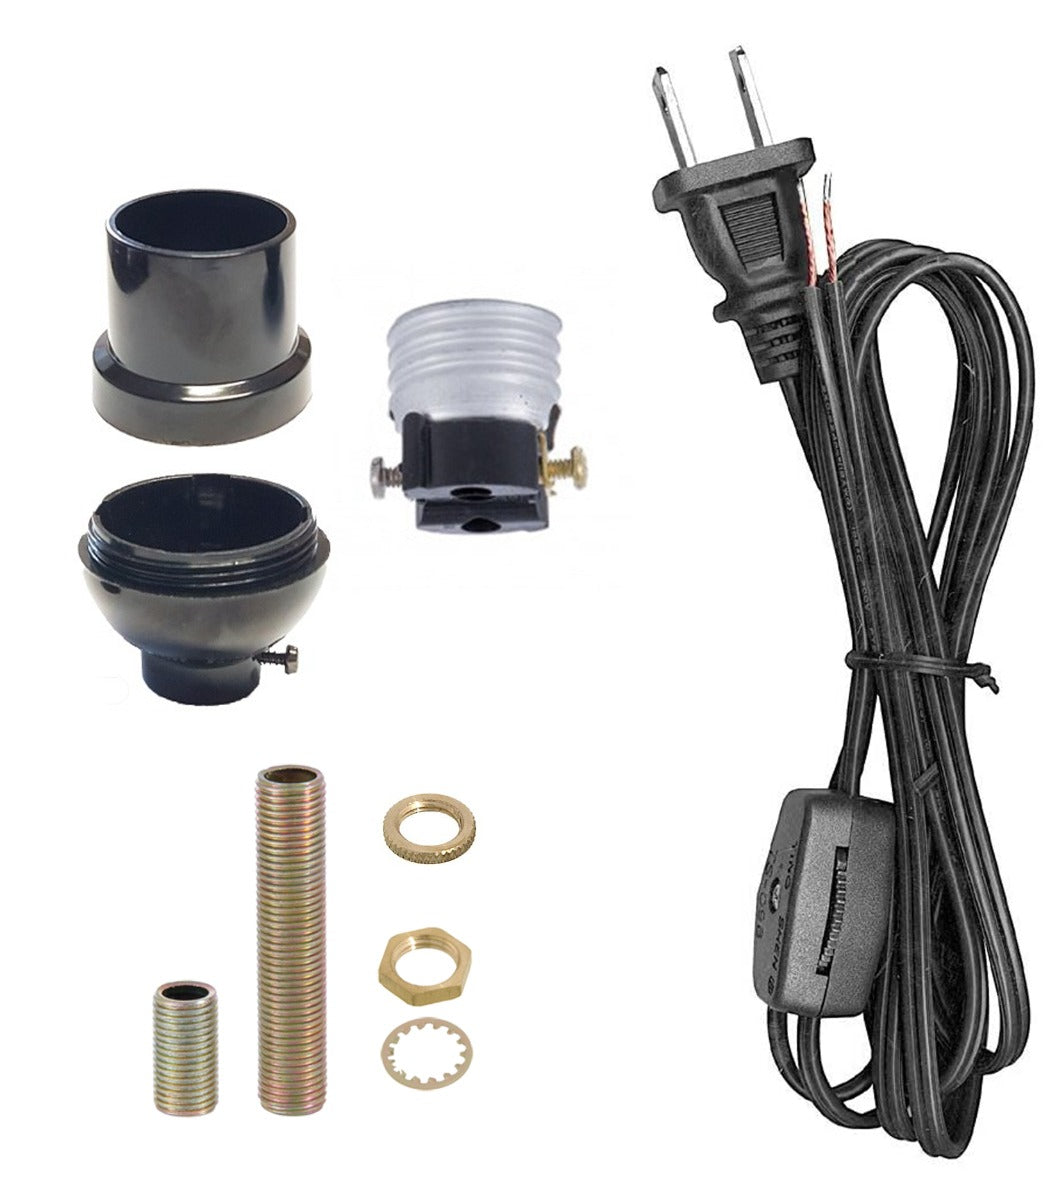 Keyless Table Lamp Wiring Kit with Plastic Socket and Rotary Switch Lamp Cord